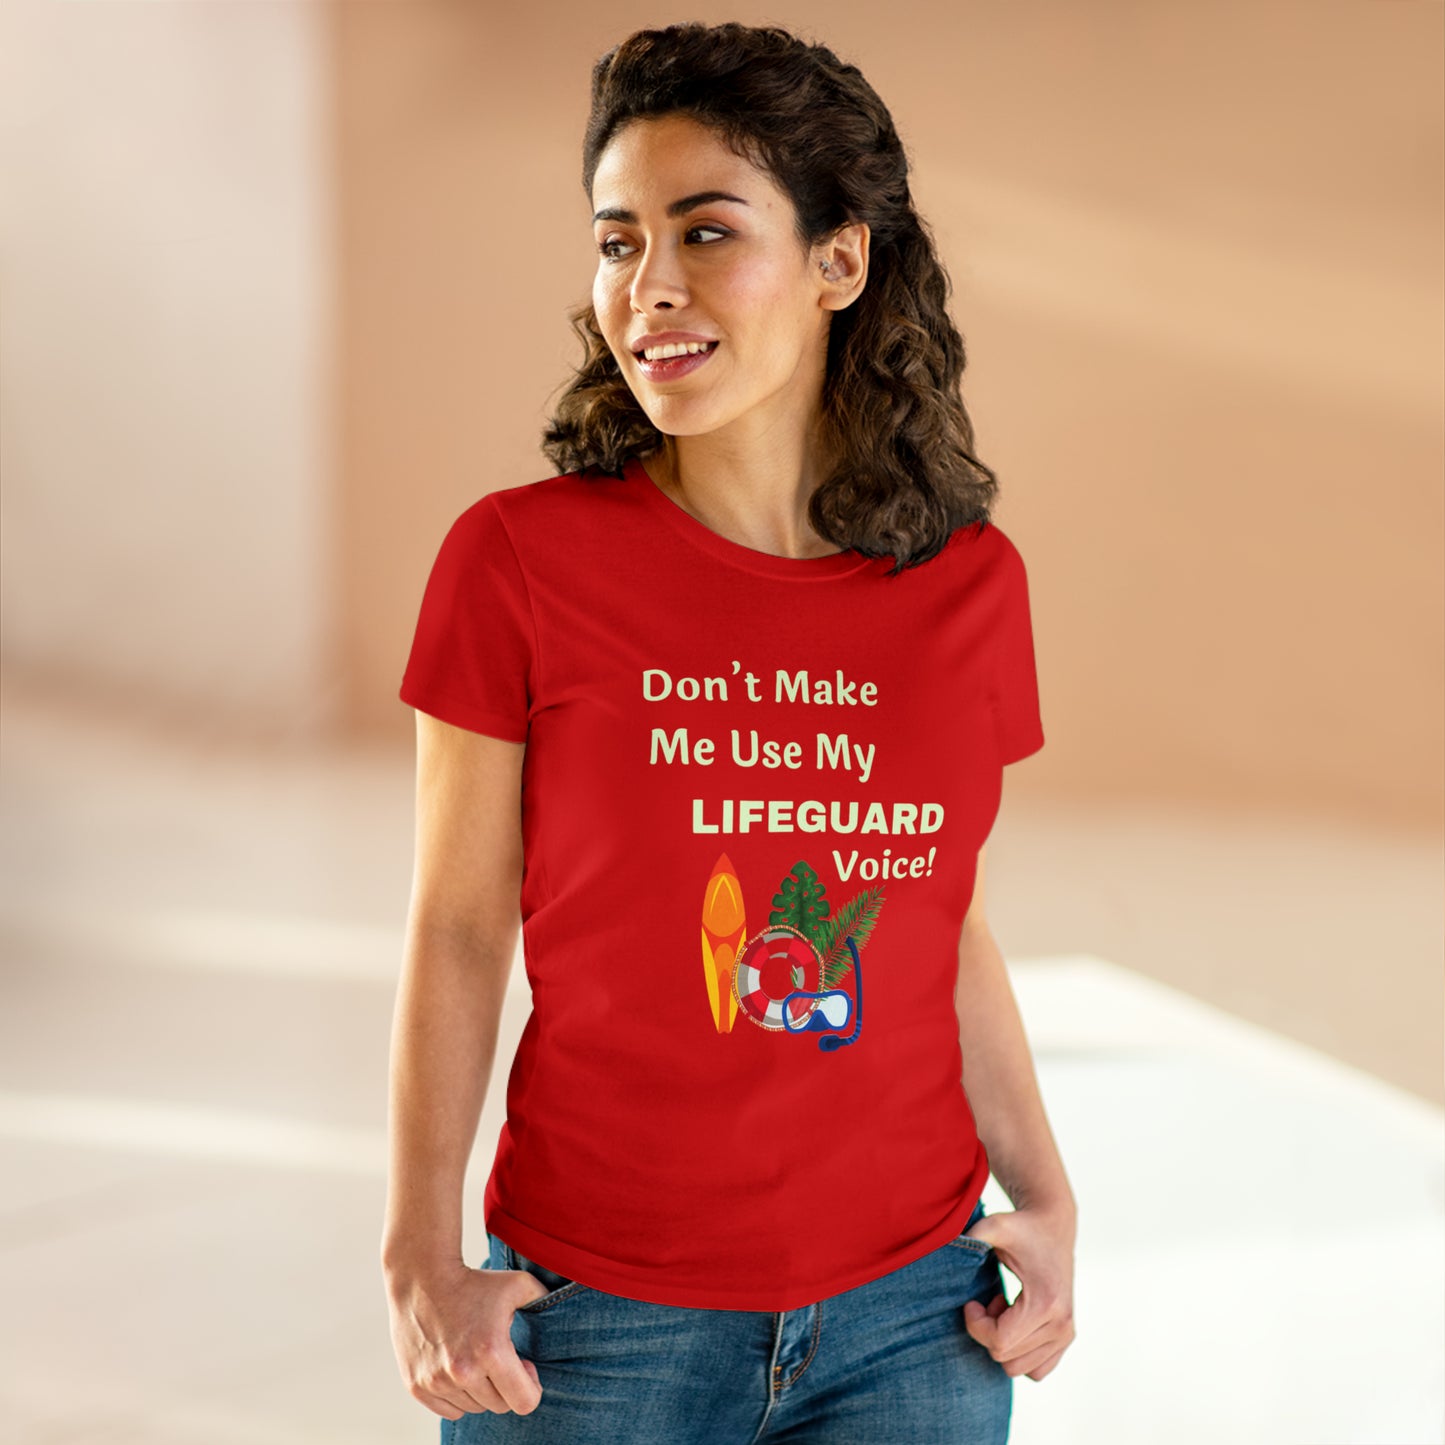 ‘Don’t make me use my lifeguard voice!’ Printed front & Back. Women's Midweight Cotton Tee